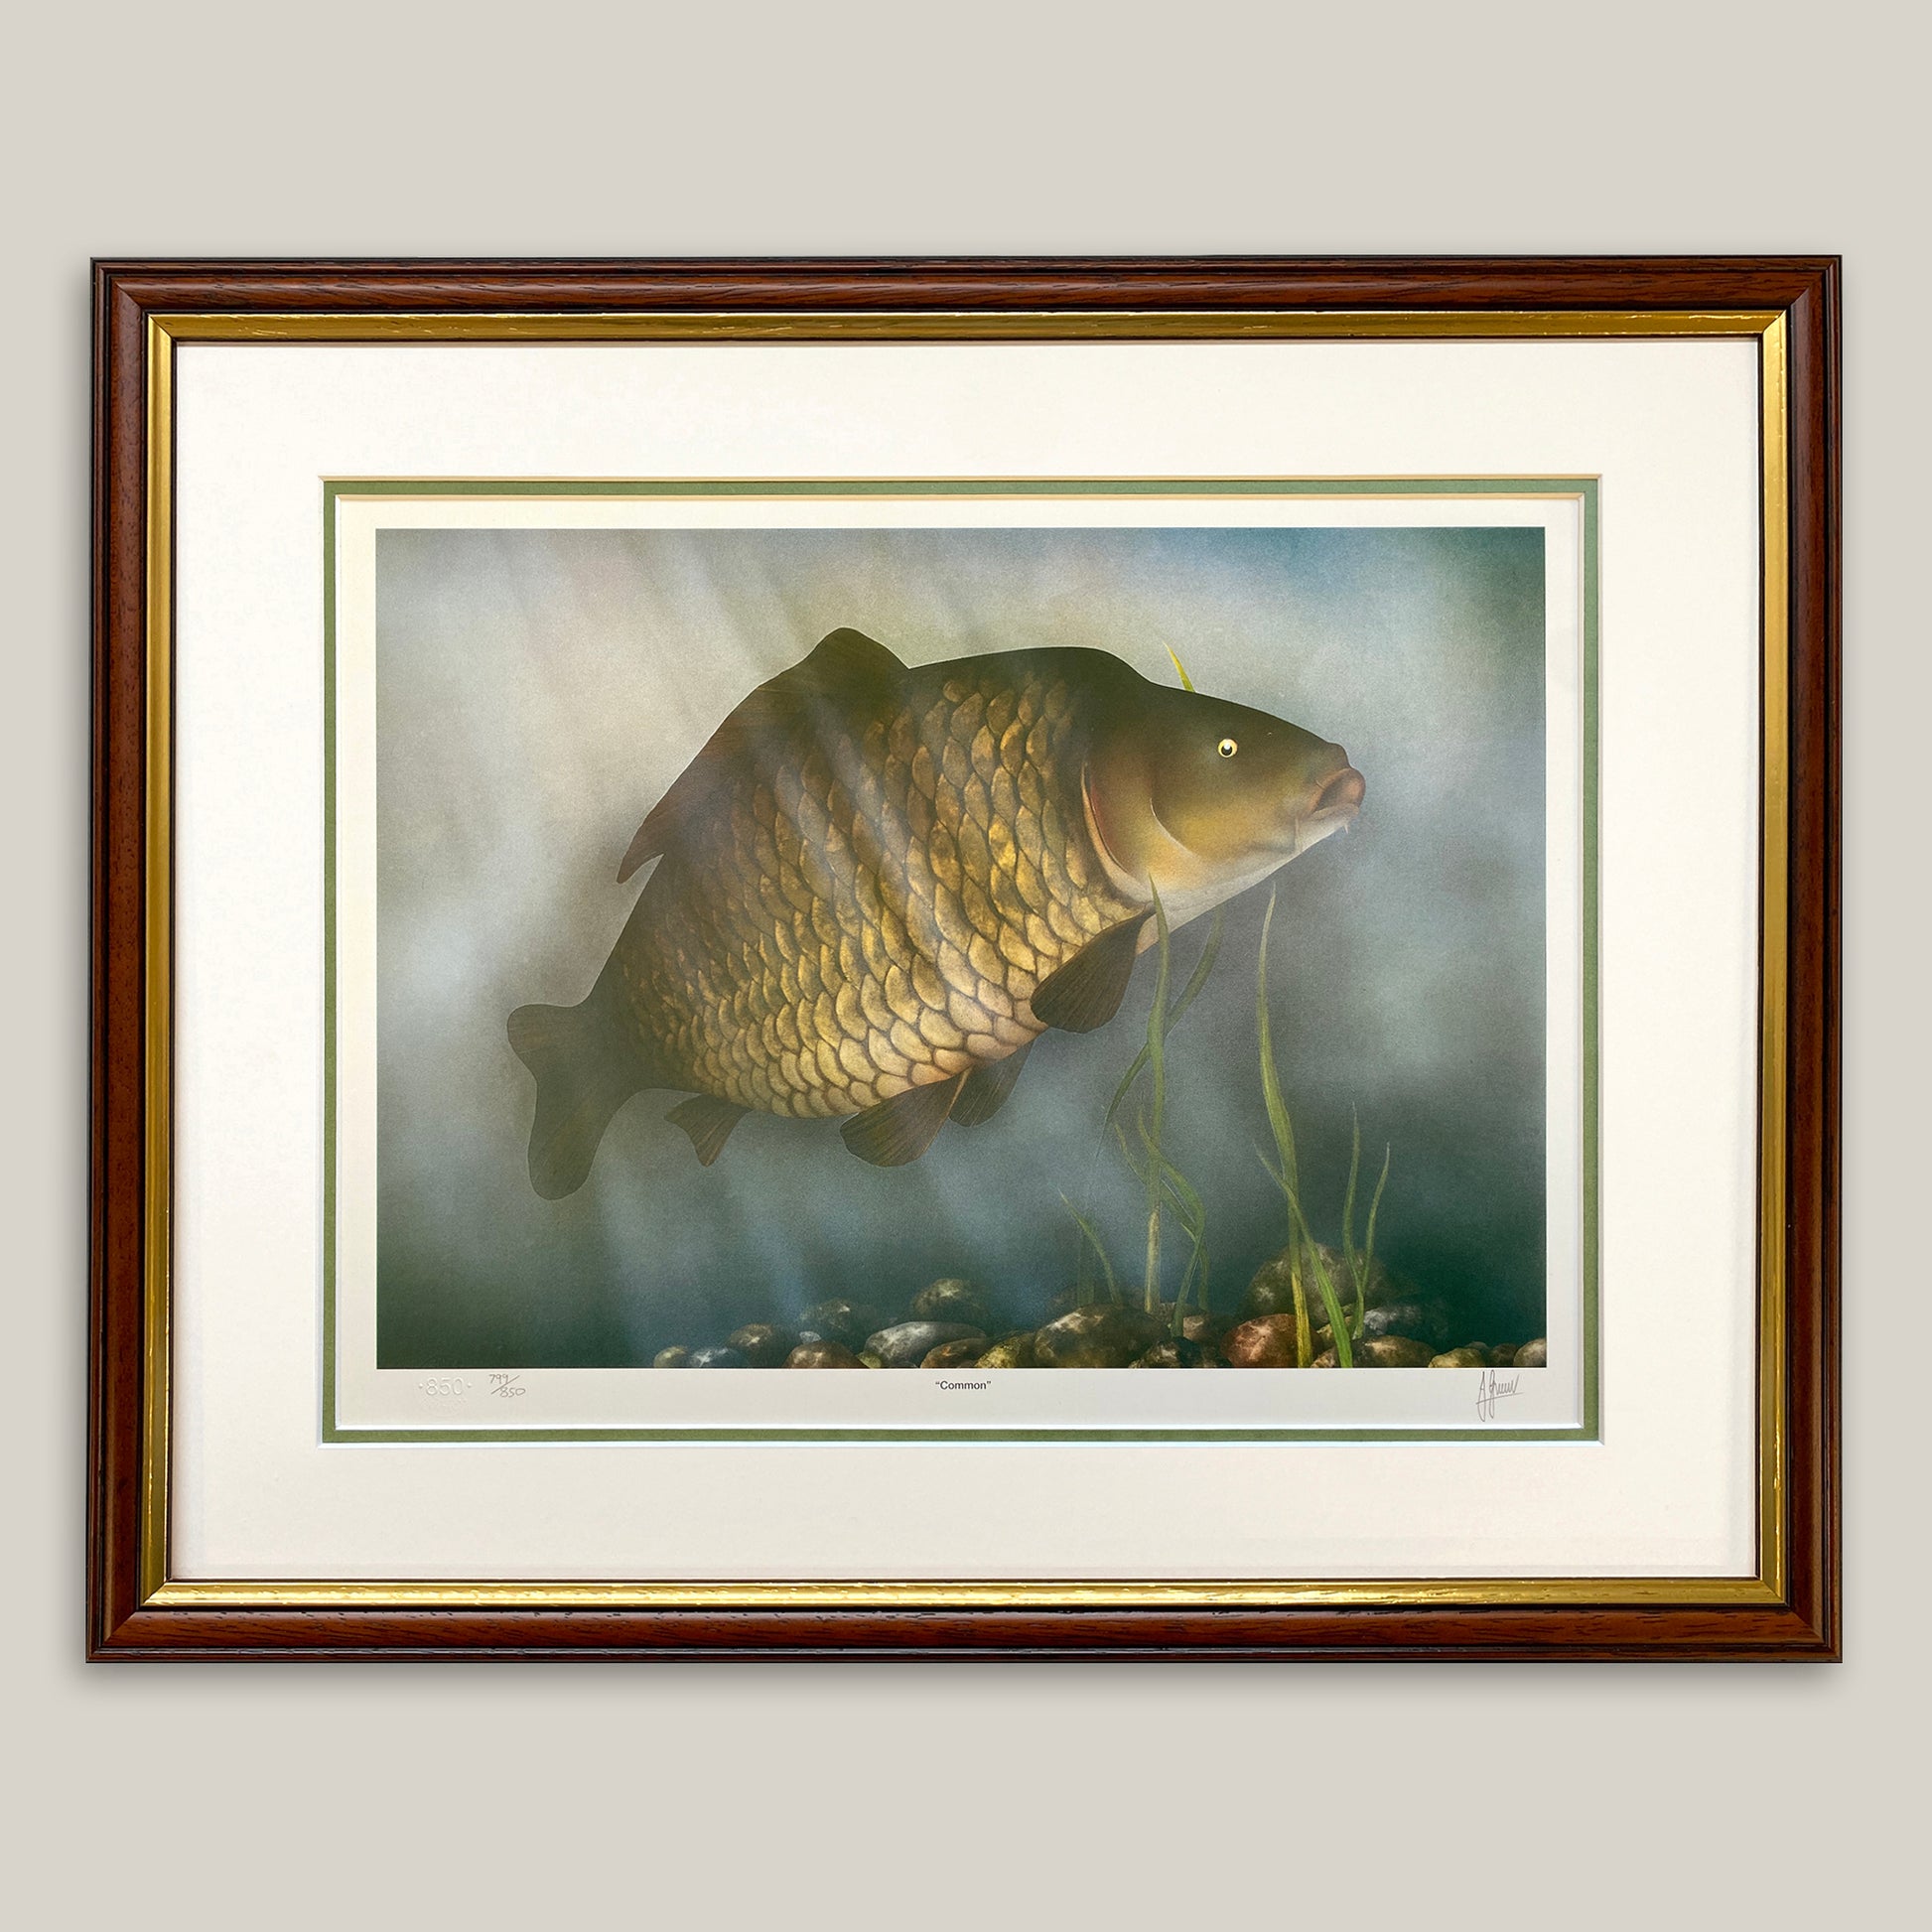 framed common carp painting by artist James Green